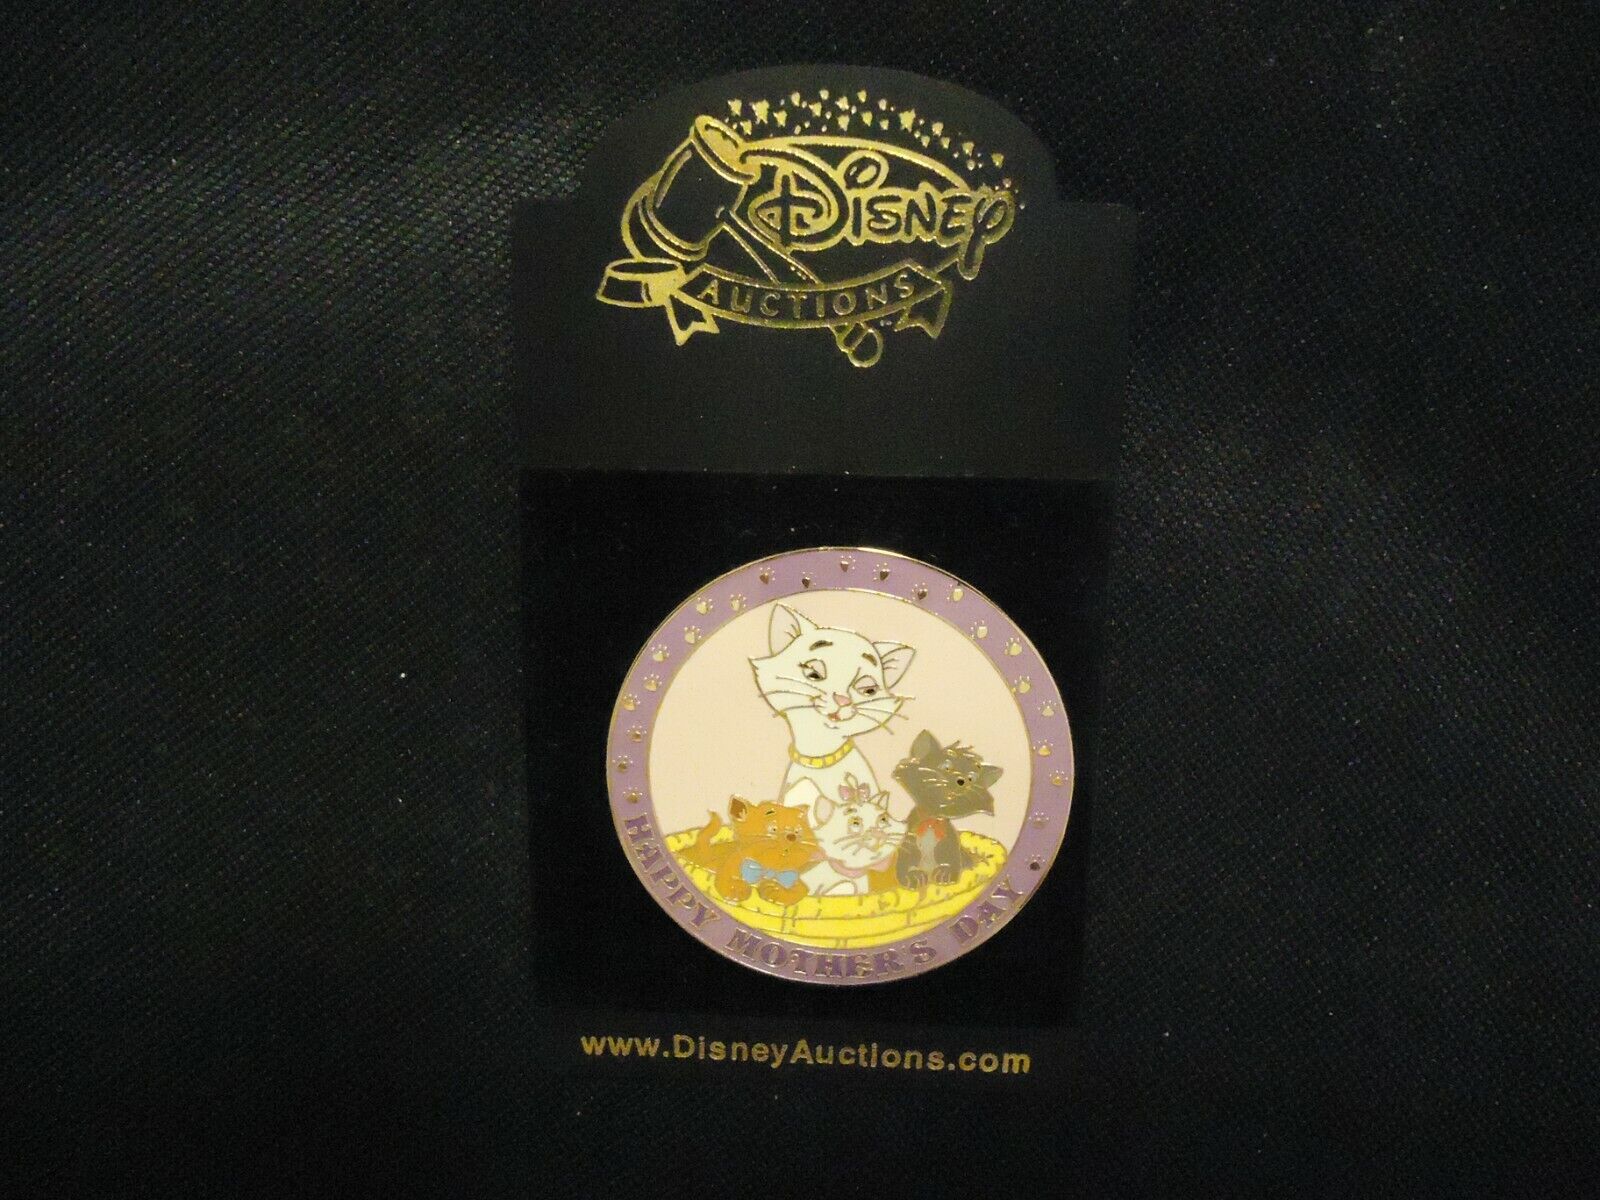 DISNEY AUCTIONS (P.I.N.S.) HAPPY MOTHER'S DAY ARISTOCATS PIN ON CARD LE 500